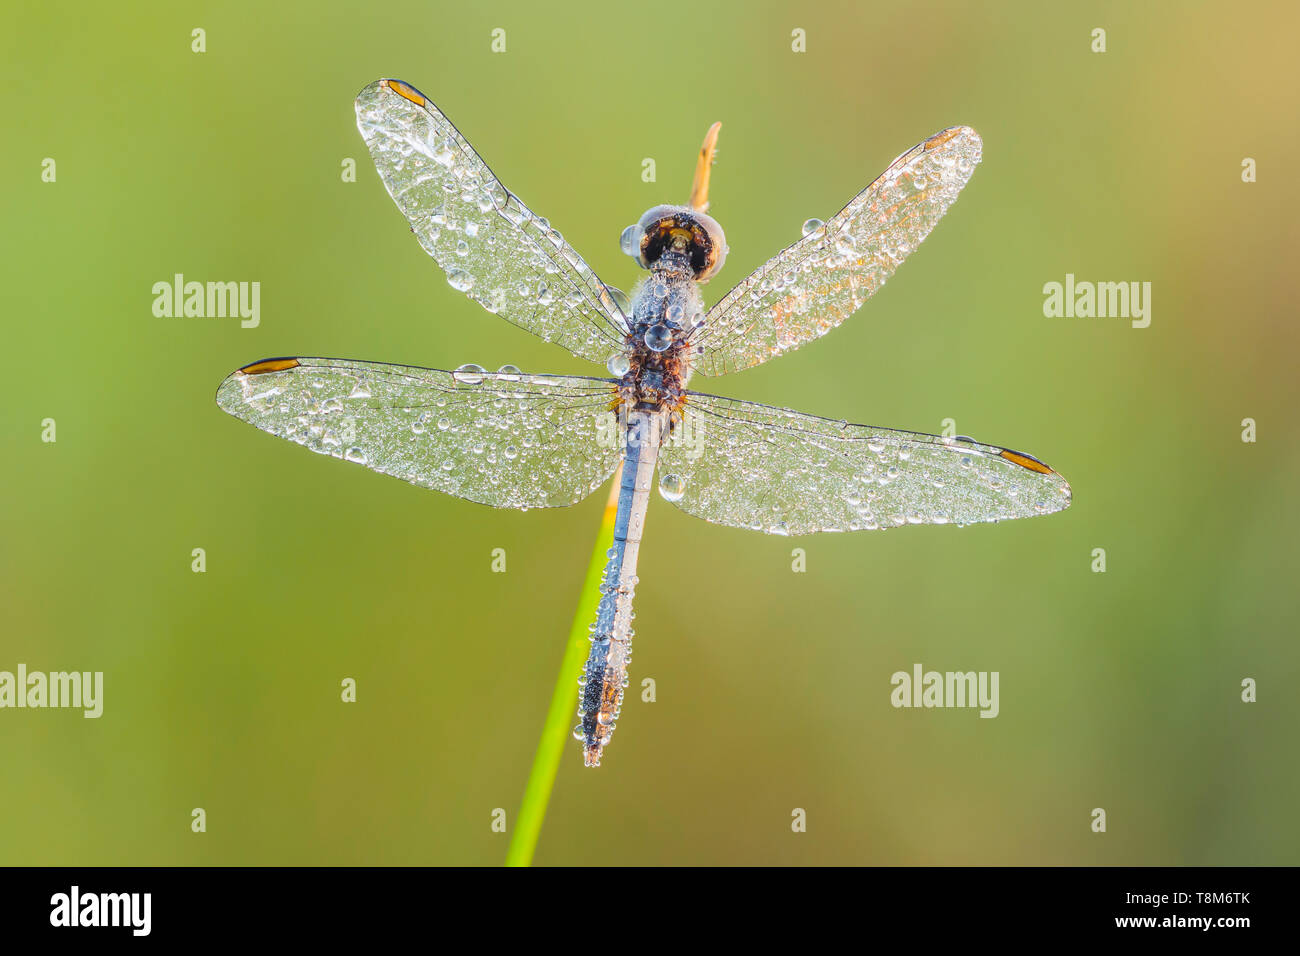 A dew-covered male Little Blue Dragonlet (Erythrodiplax minuscula) perches while waiting for the sun to heat up wings in the early morning. Stock Photo